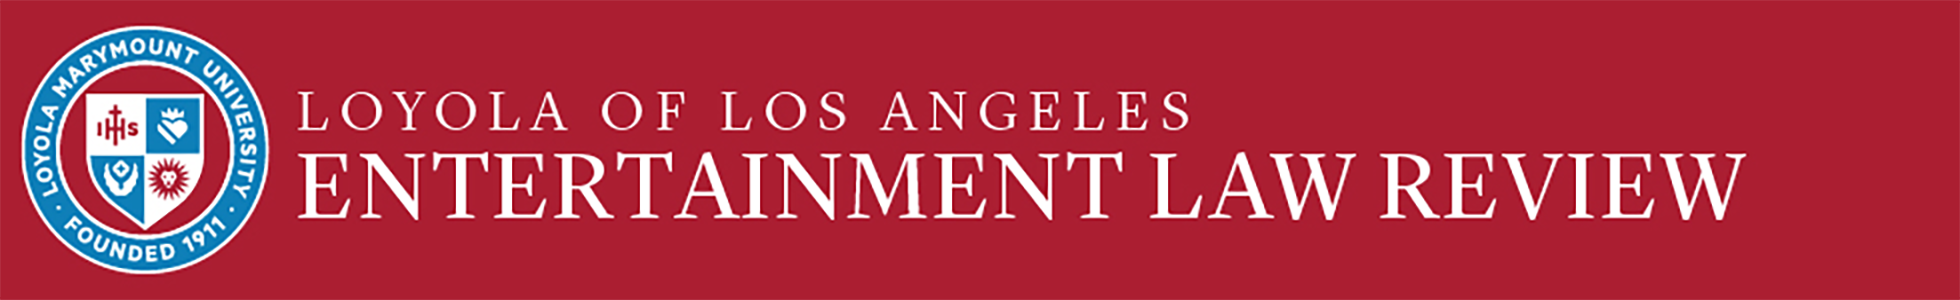 Loyola of Los Angeles Entertainment Law Review